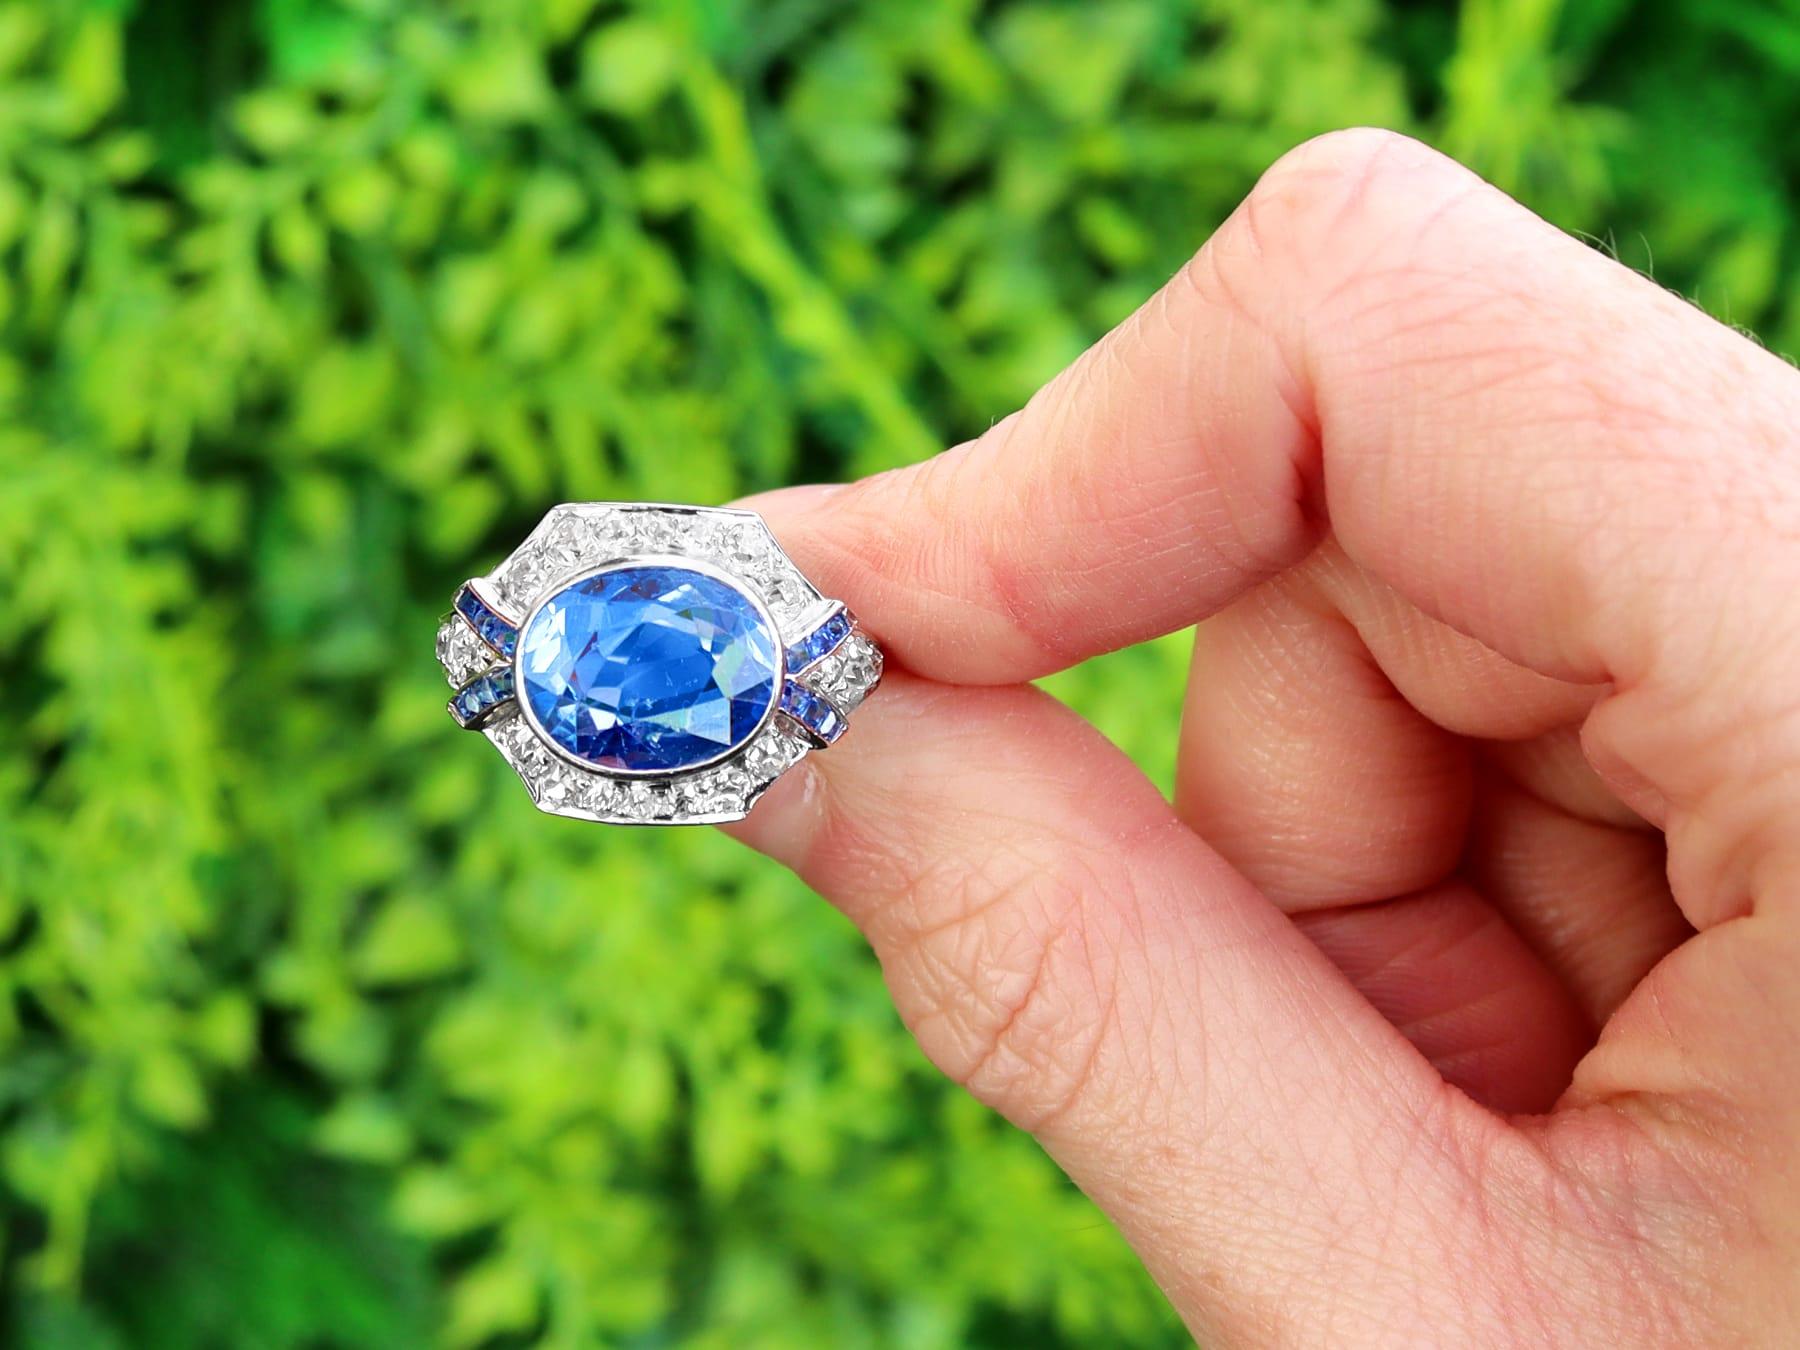 A stunning, fine and impressive antique 5.14 carat Ceylon sapphire and 0.96 carat diamond, platinum Art Deco cocktail ring; part of our diverse collection of antique sapphire rings.

This stunning, fine and impressive antique Ceylon sapphire and